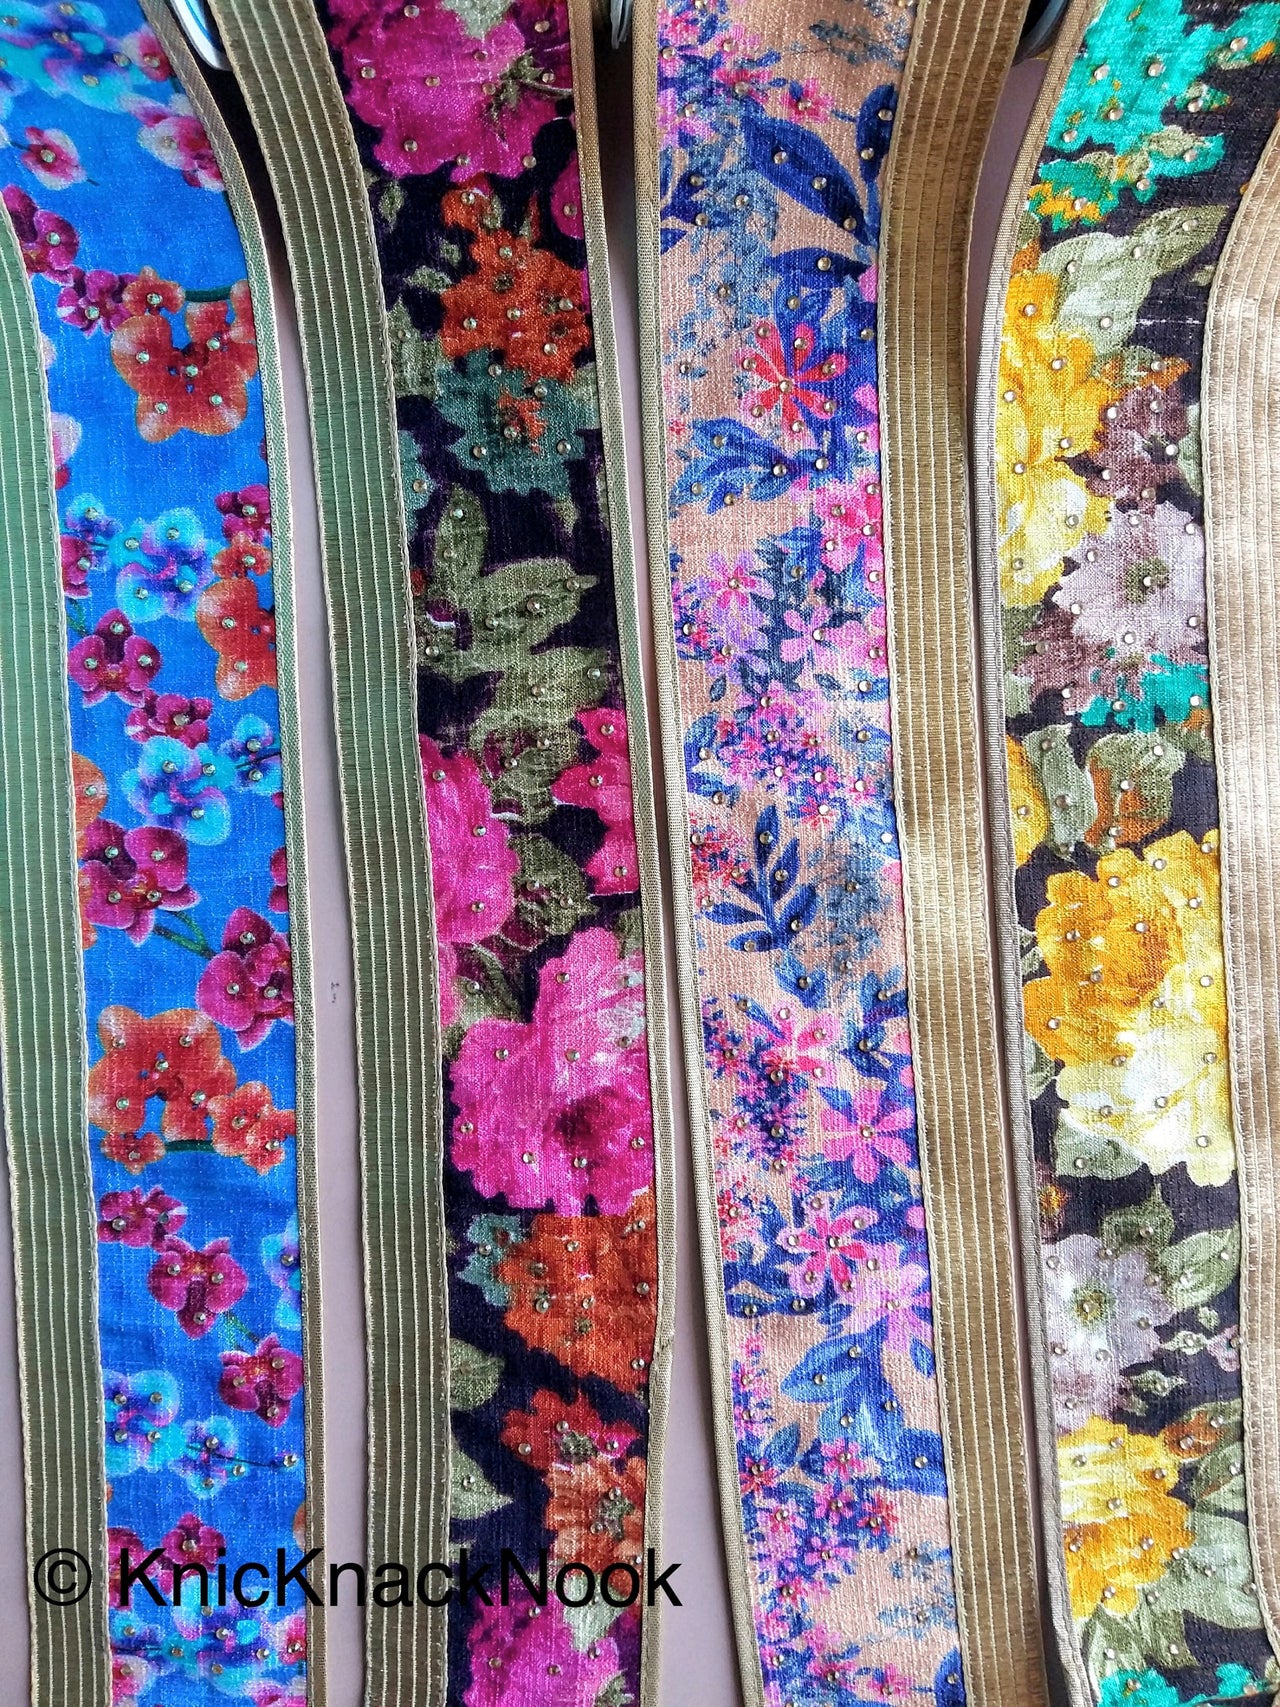 Blue And Gold Fabric Trim With Pink, Orange And Blue Floral Design Embellished With Diamantes, Digital Print Trim Border - 200317L403